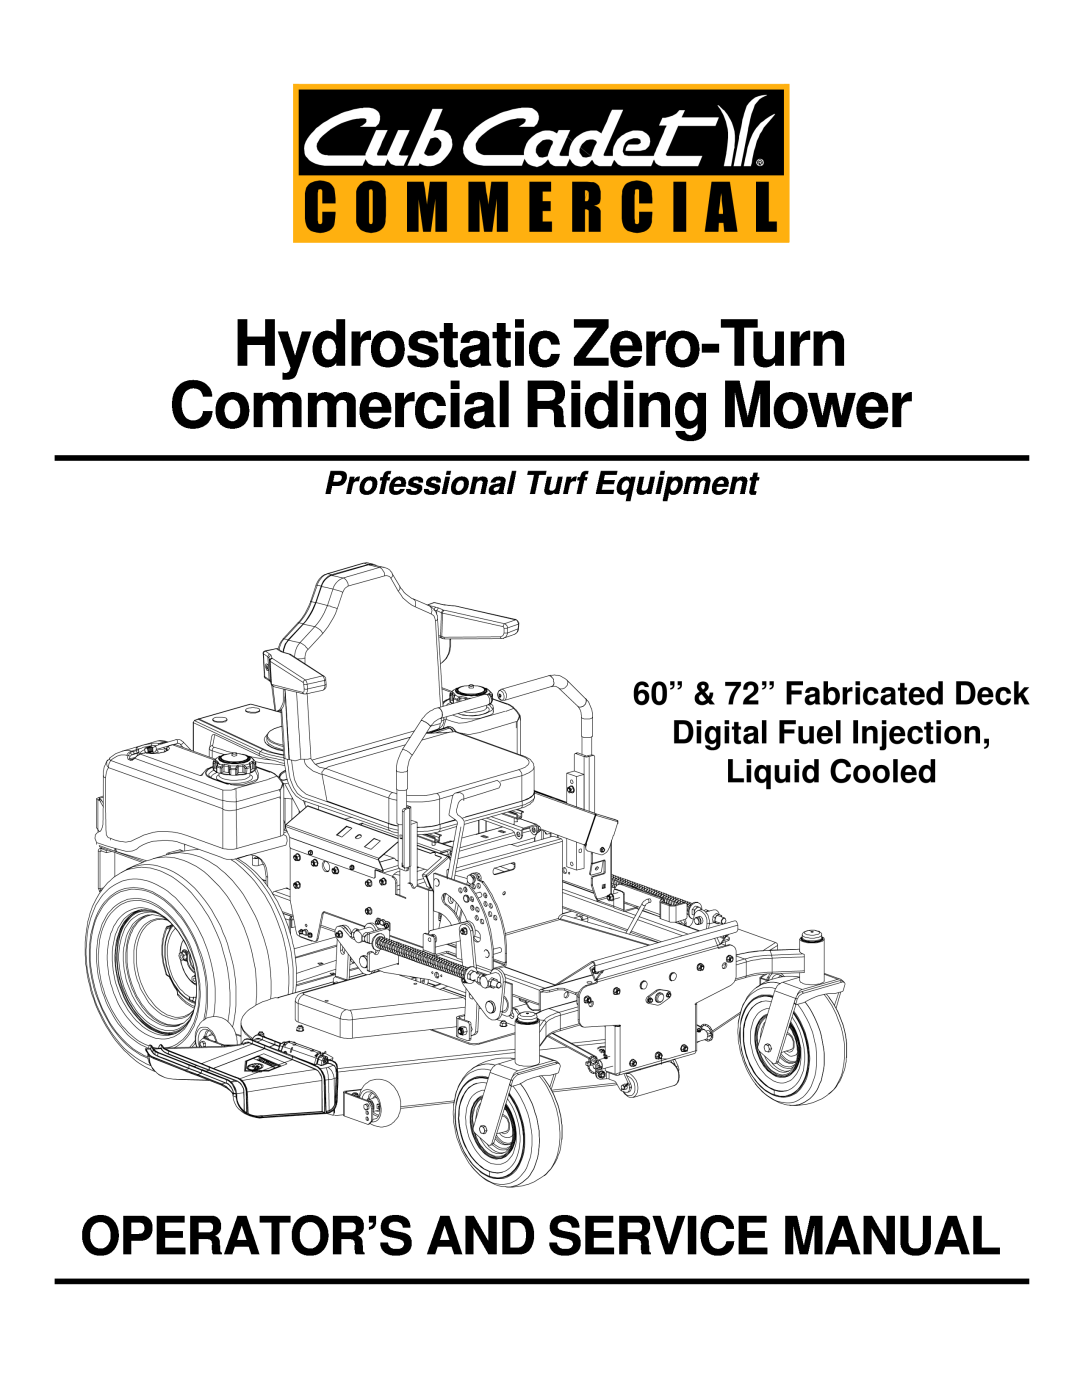 Cub Cadet 60-inch & 72-inch Fabricated Deck service manual 60” & 72” Fabricated Deck Digital Fuel Injection Liquid Cooled 